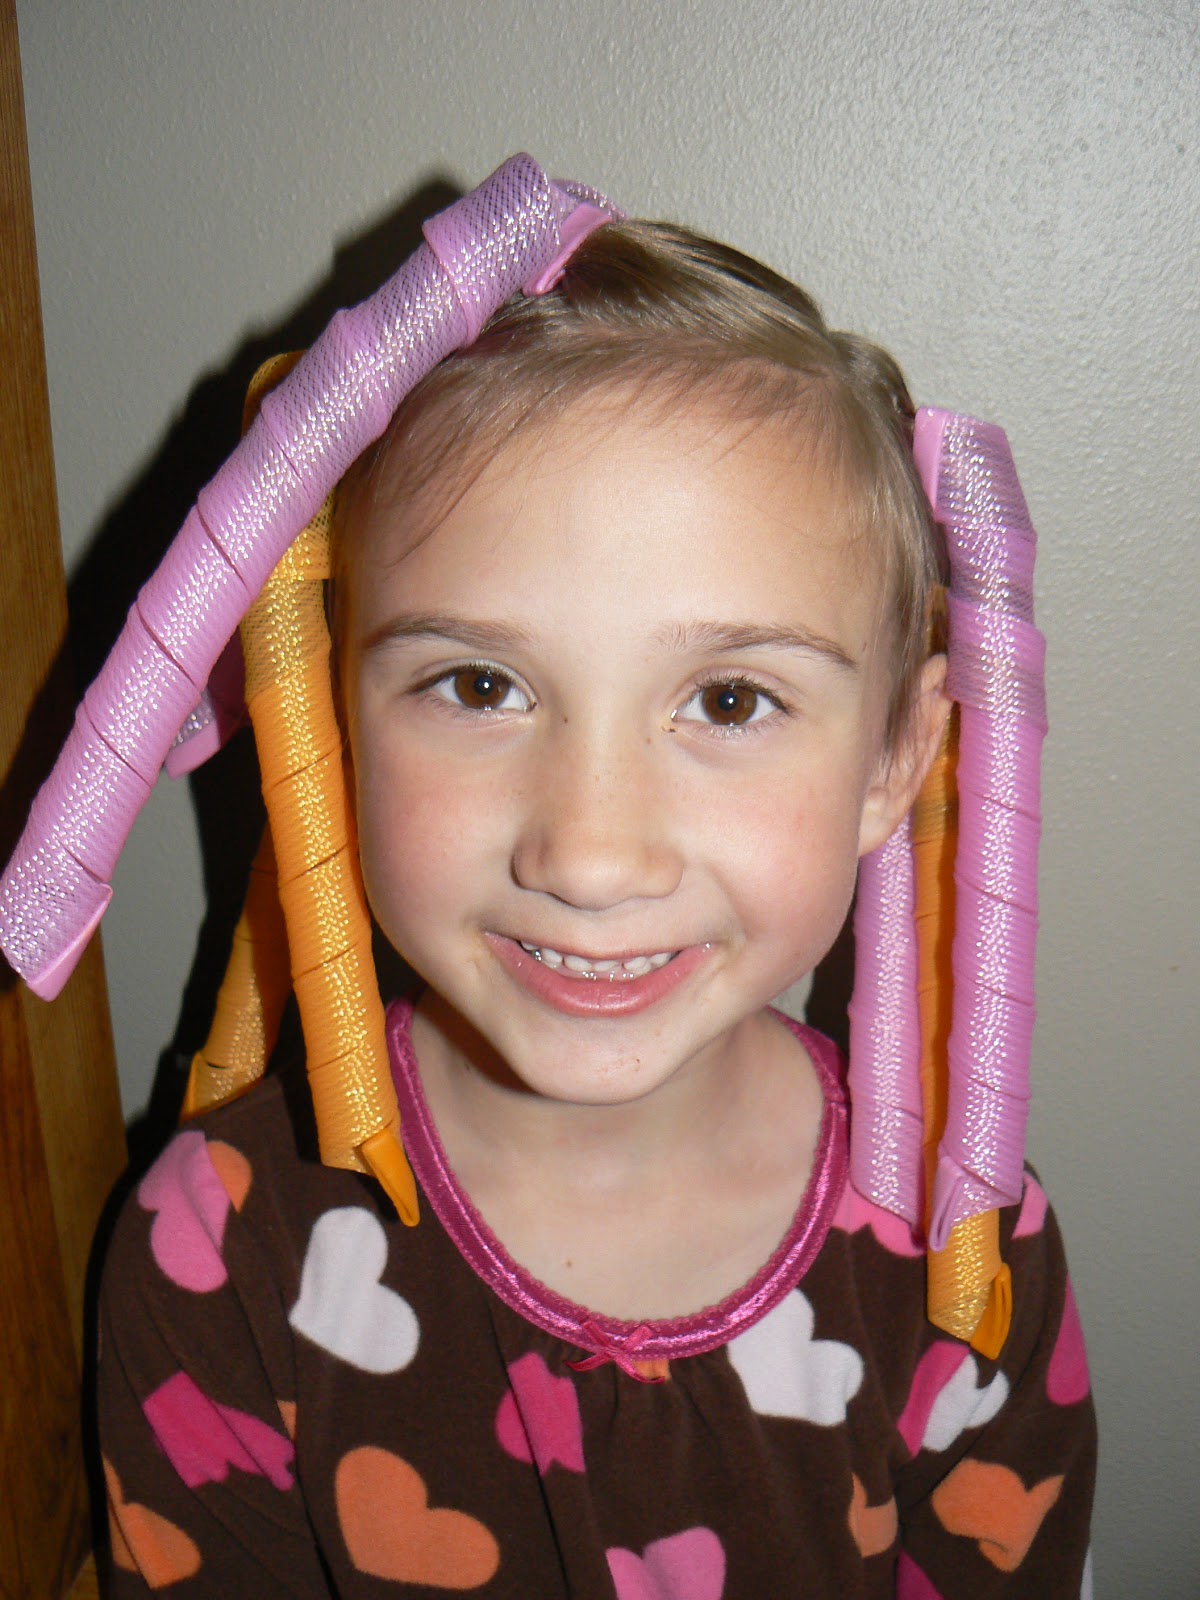 These curlers are quite a bit longer than her hair and I was surprised